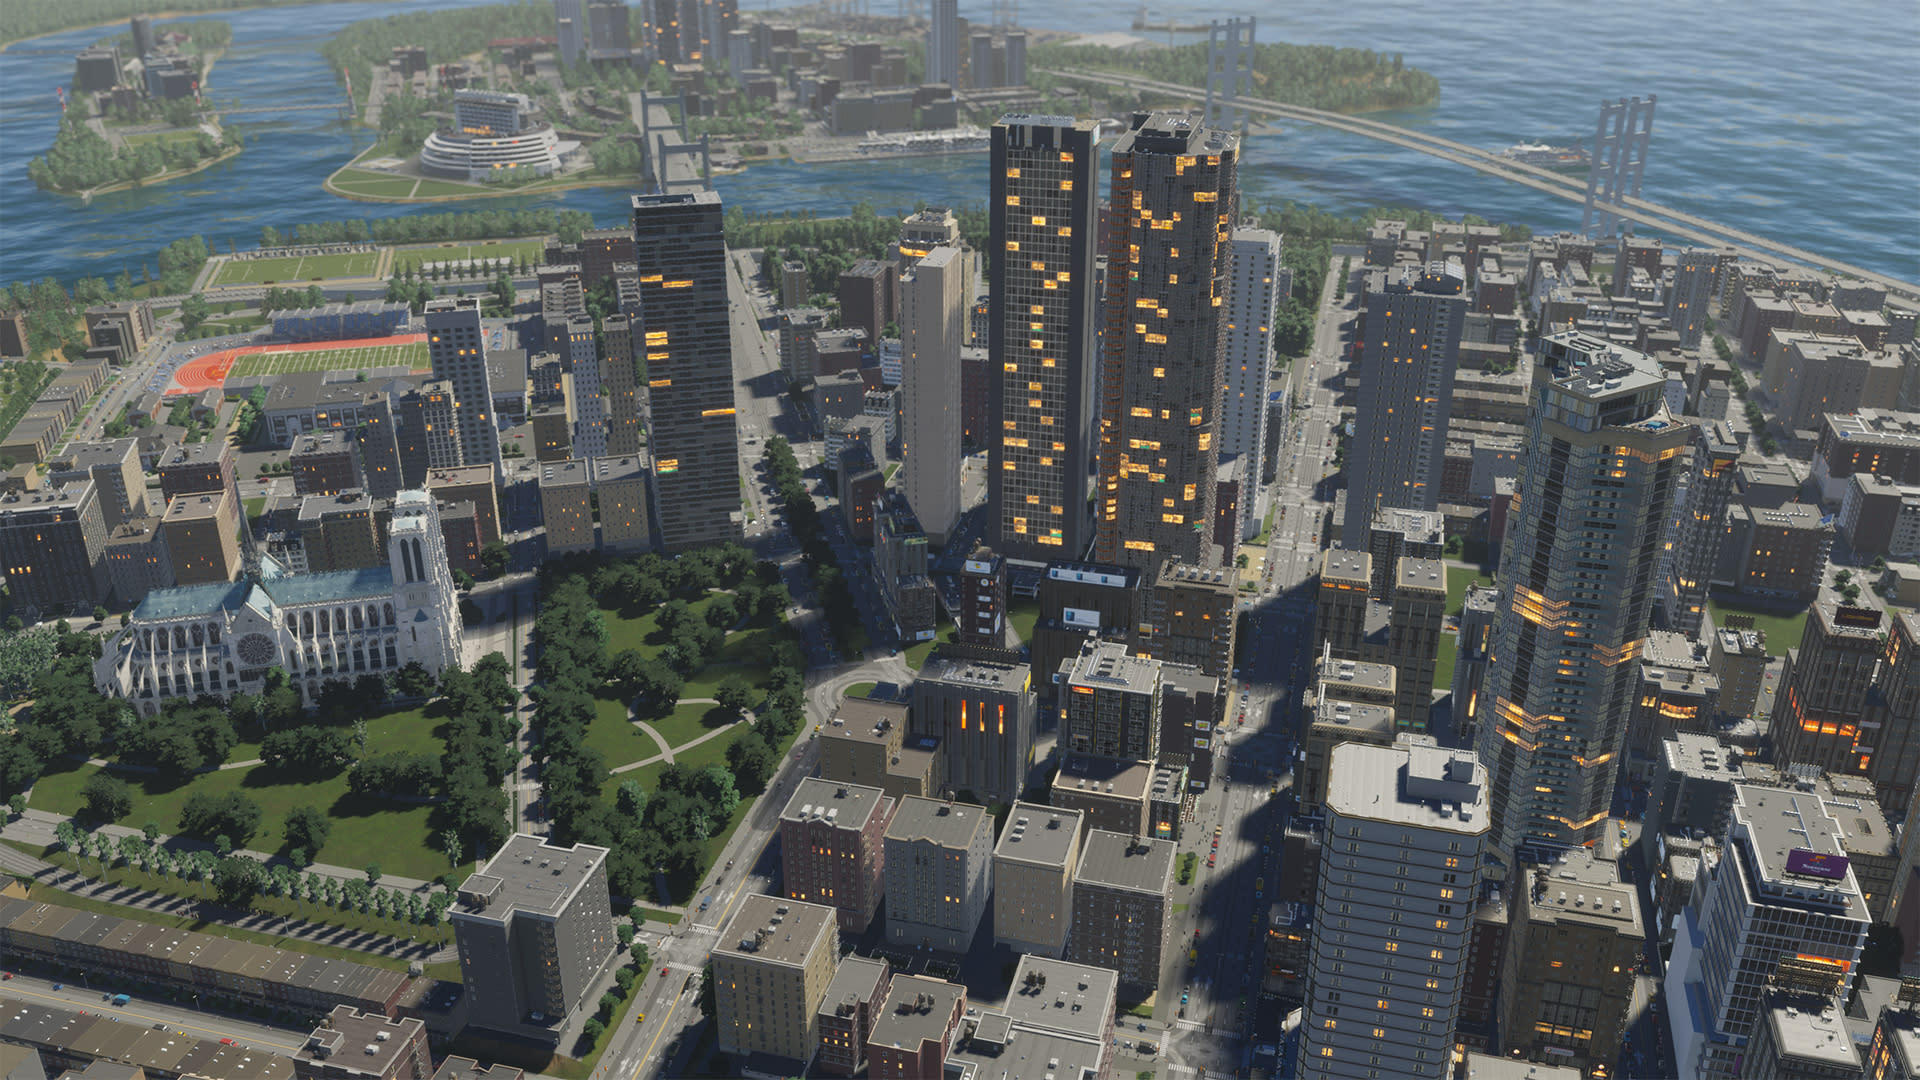 Cities Skylines 2: Low-end PC Smooth Gameplay